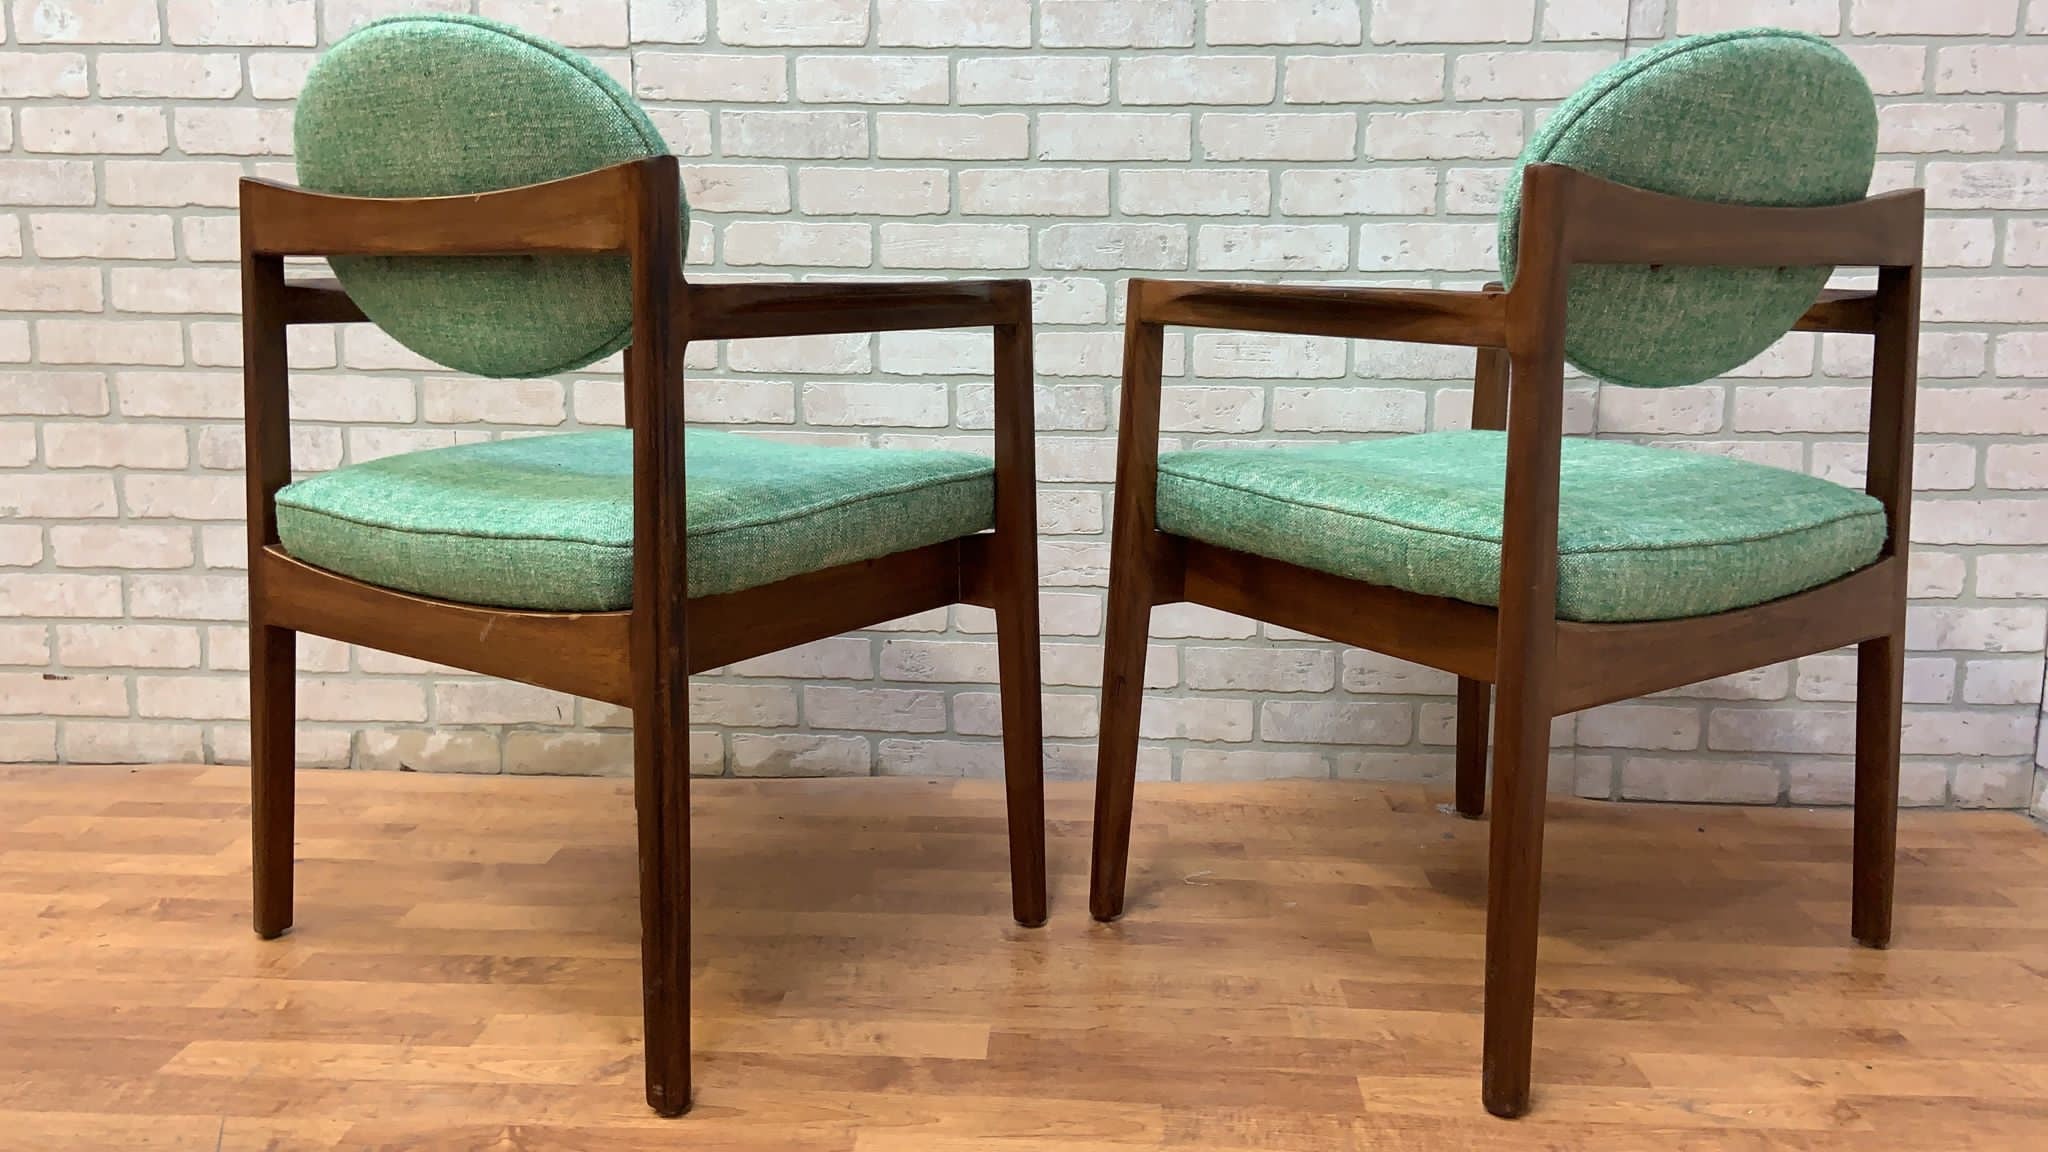 Mid Century Modern Oval-Back Armchairs by Jens Risom Newly Reupholstered in Green Fabric - Pair